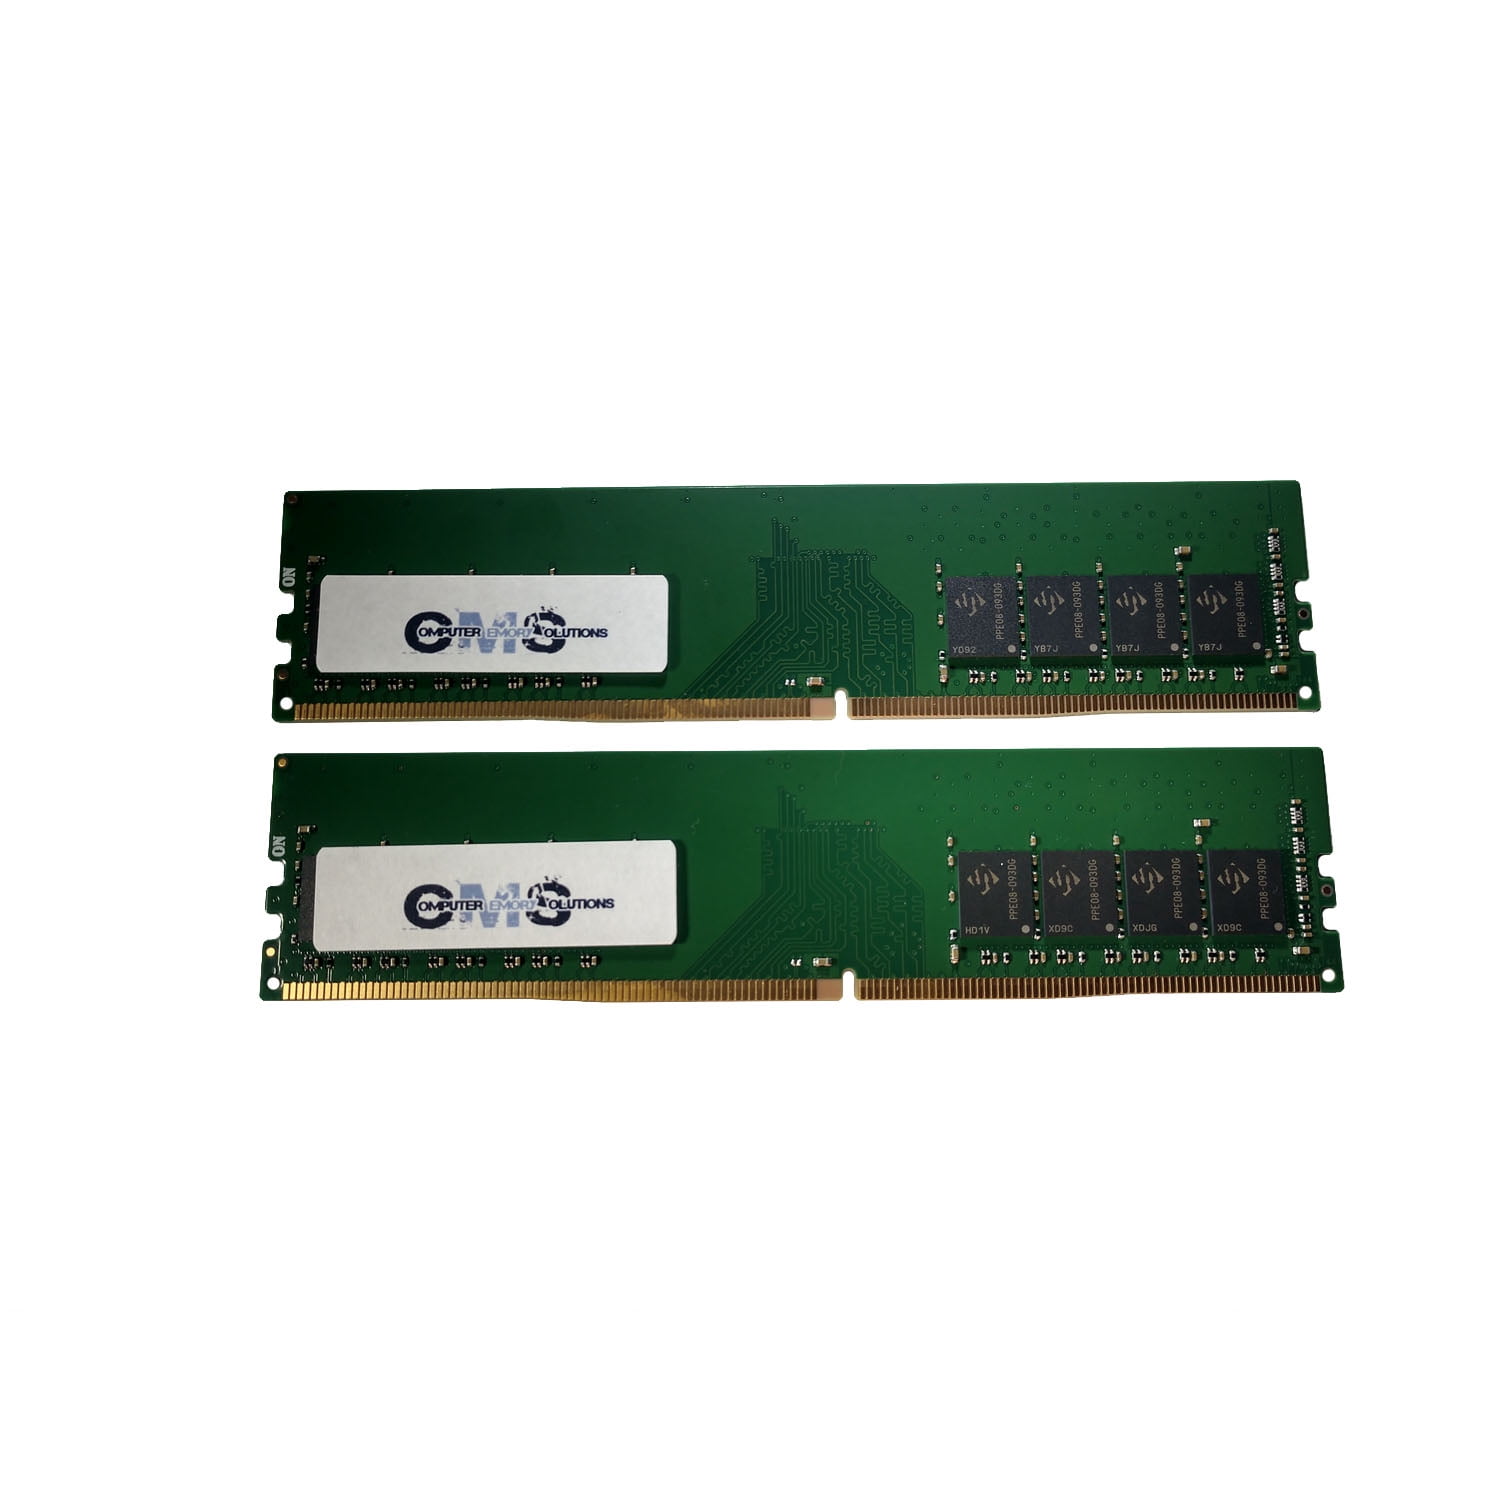 Super X11SCZ-F 5019C-MHN2 Memory Ram Compatible with Supermicro SuperServer 1019C-HTN2 Super X11SCZ-F by CMS c111 8GB 1X8GB